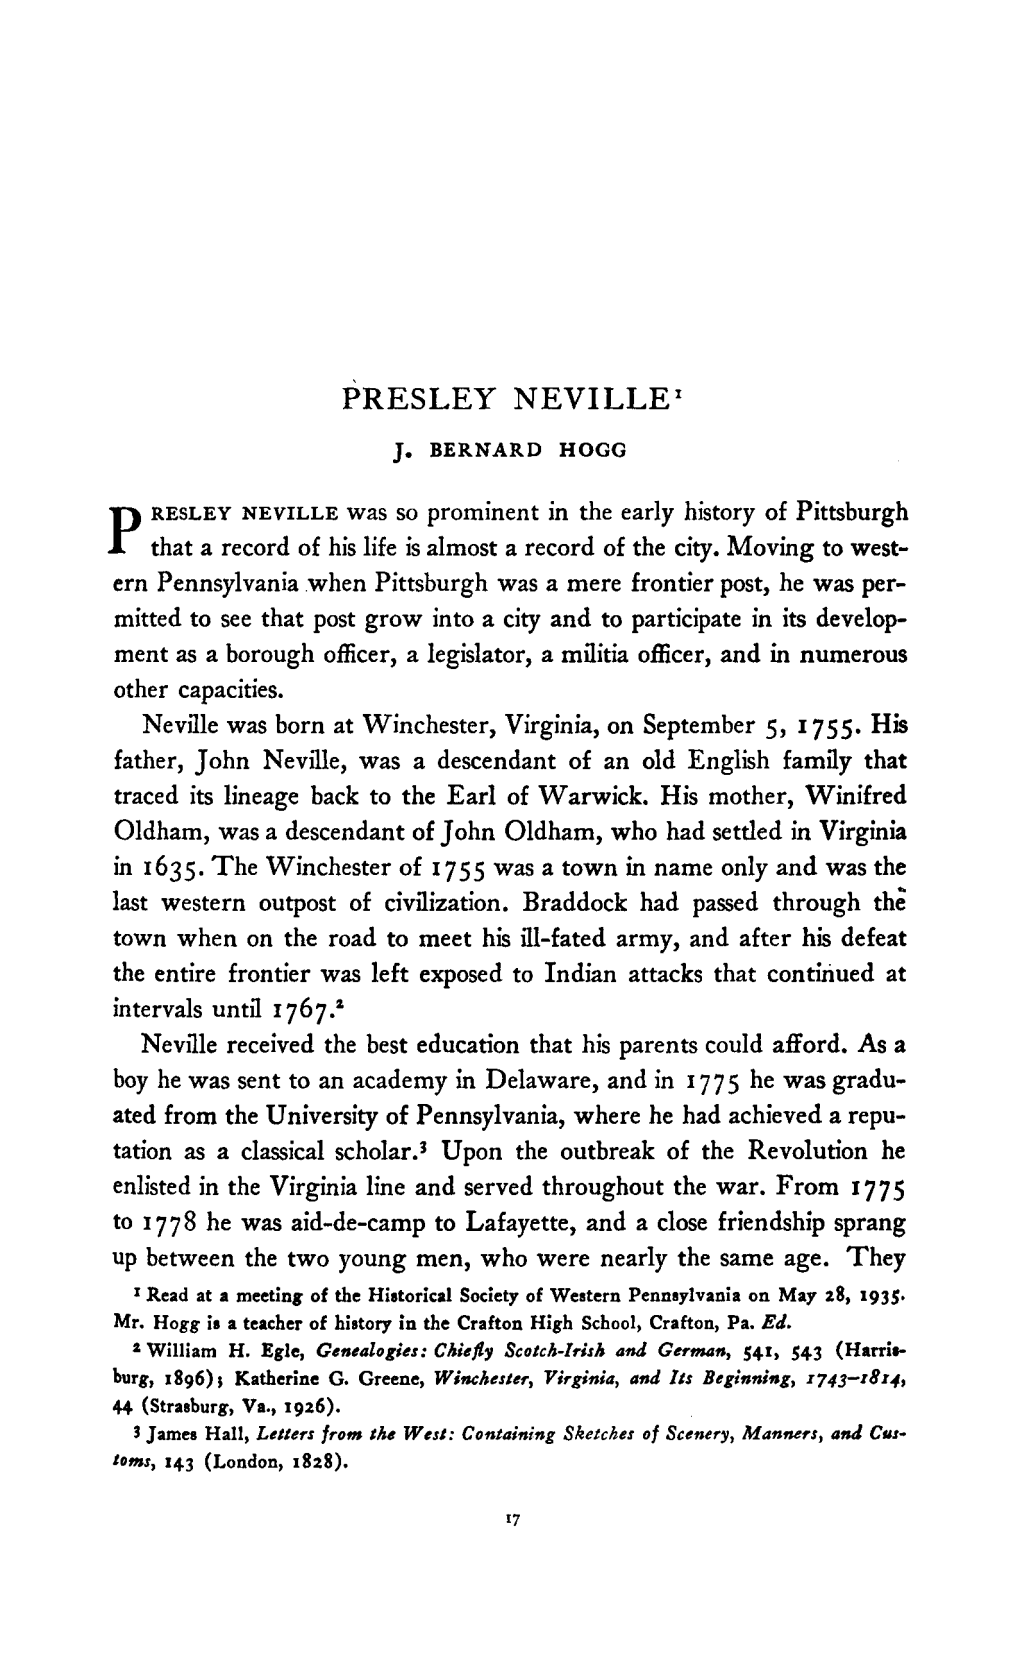 Presley Neville Was So Prominent in the Early History of Pittsburgh